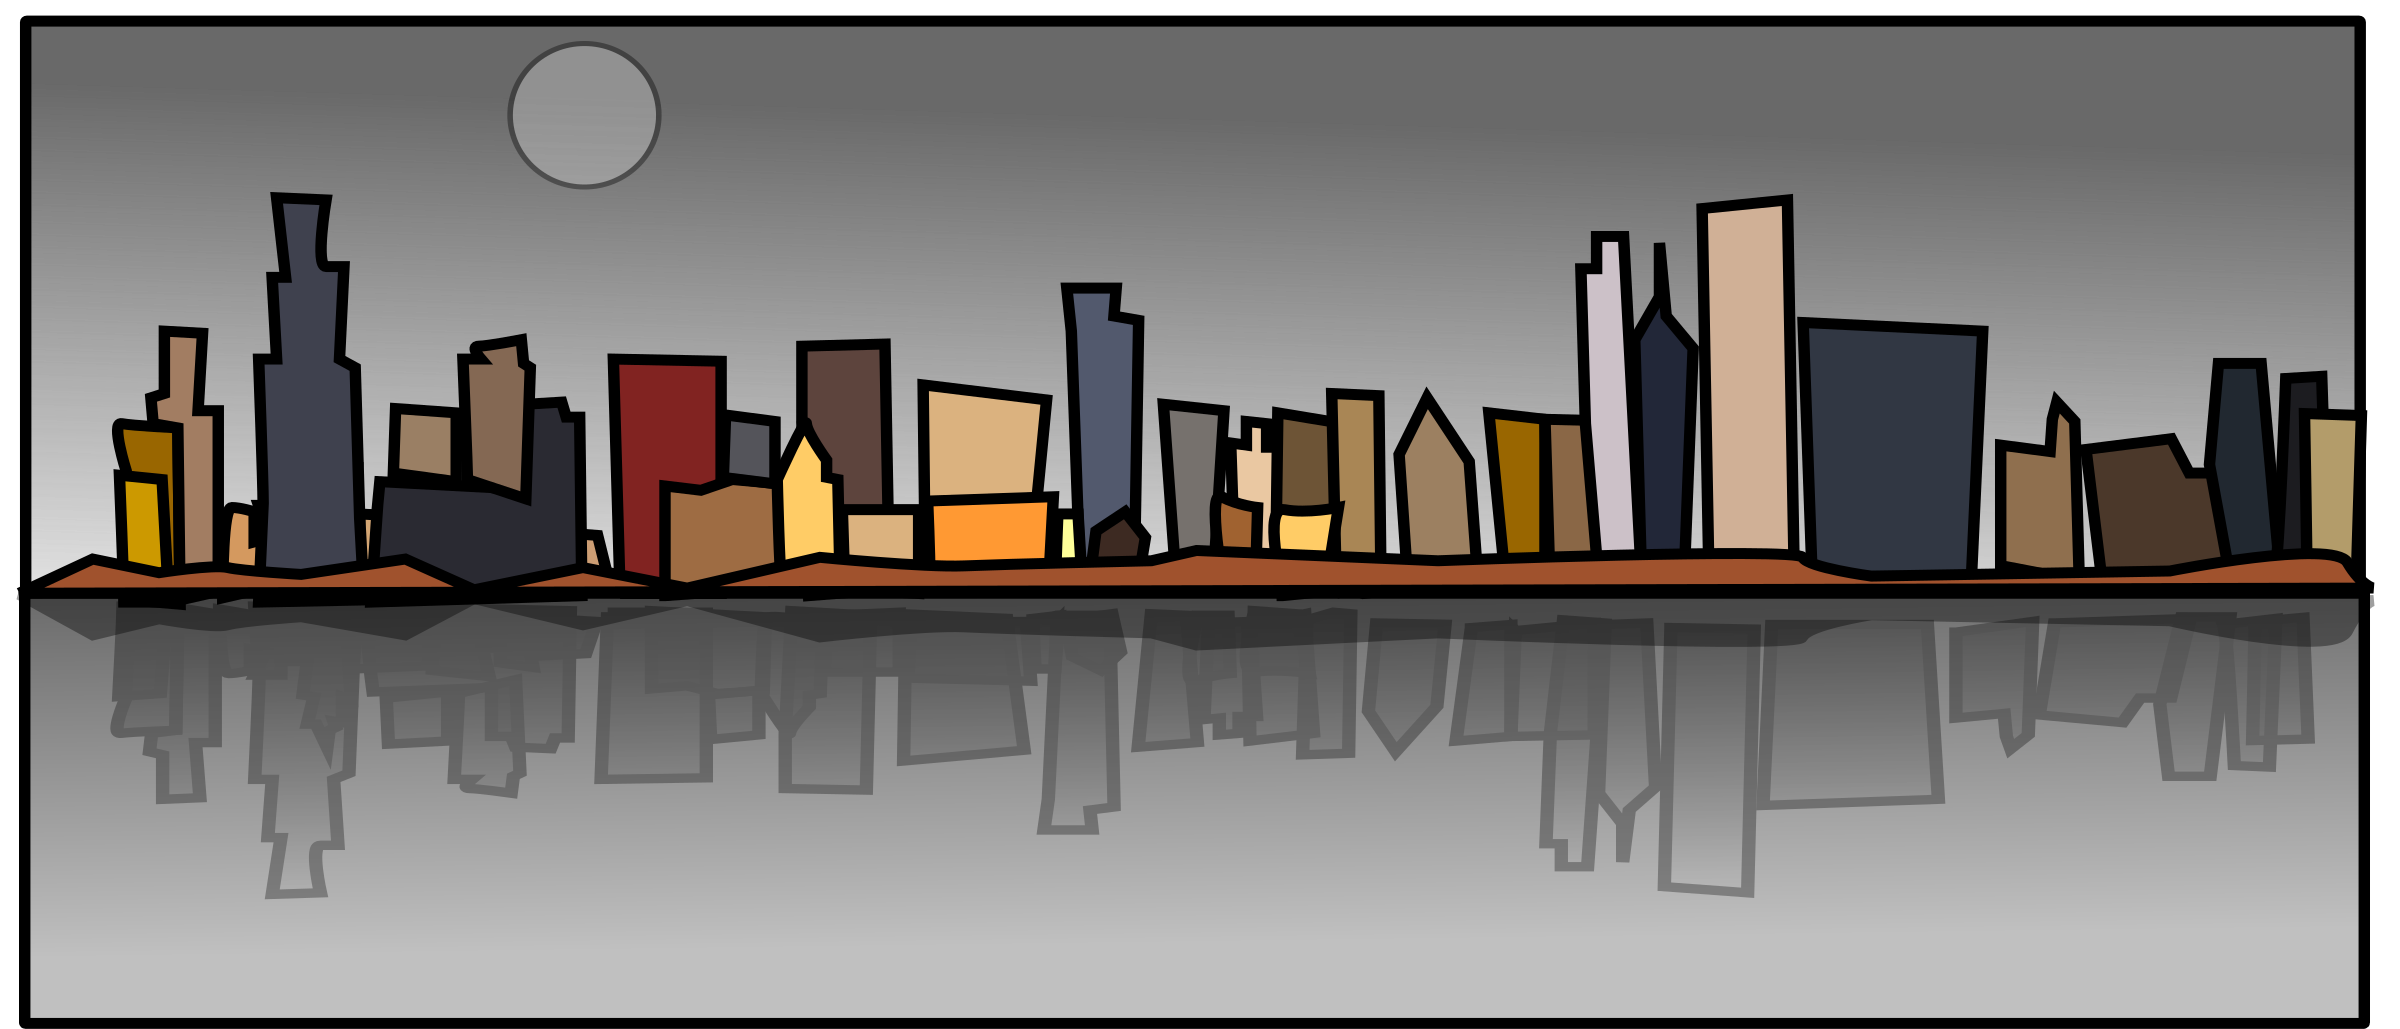 skyline clipart waterfront